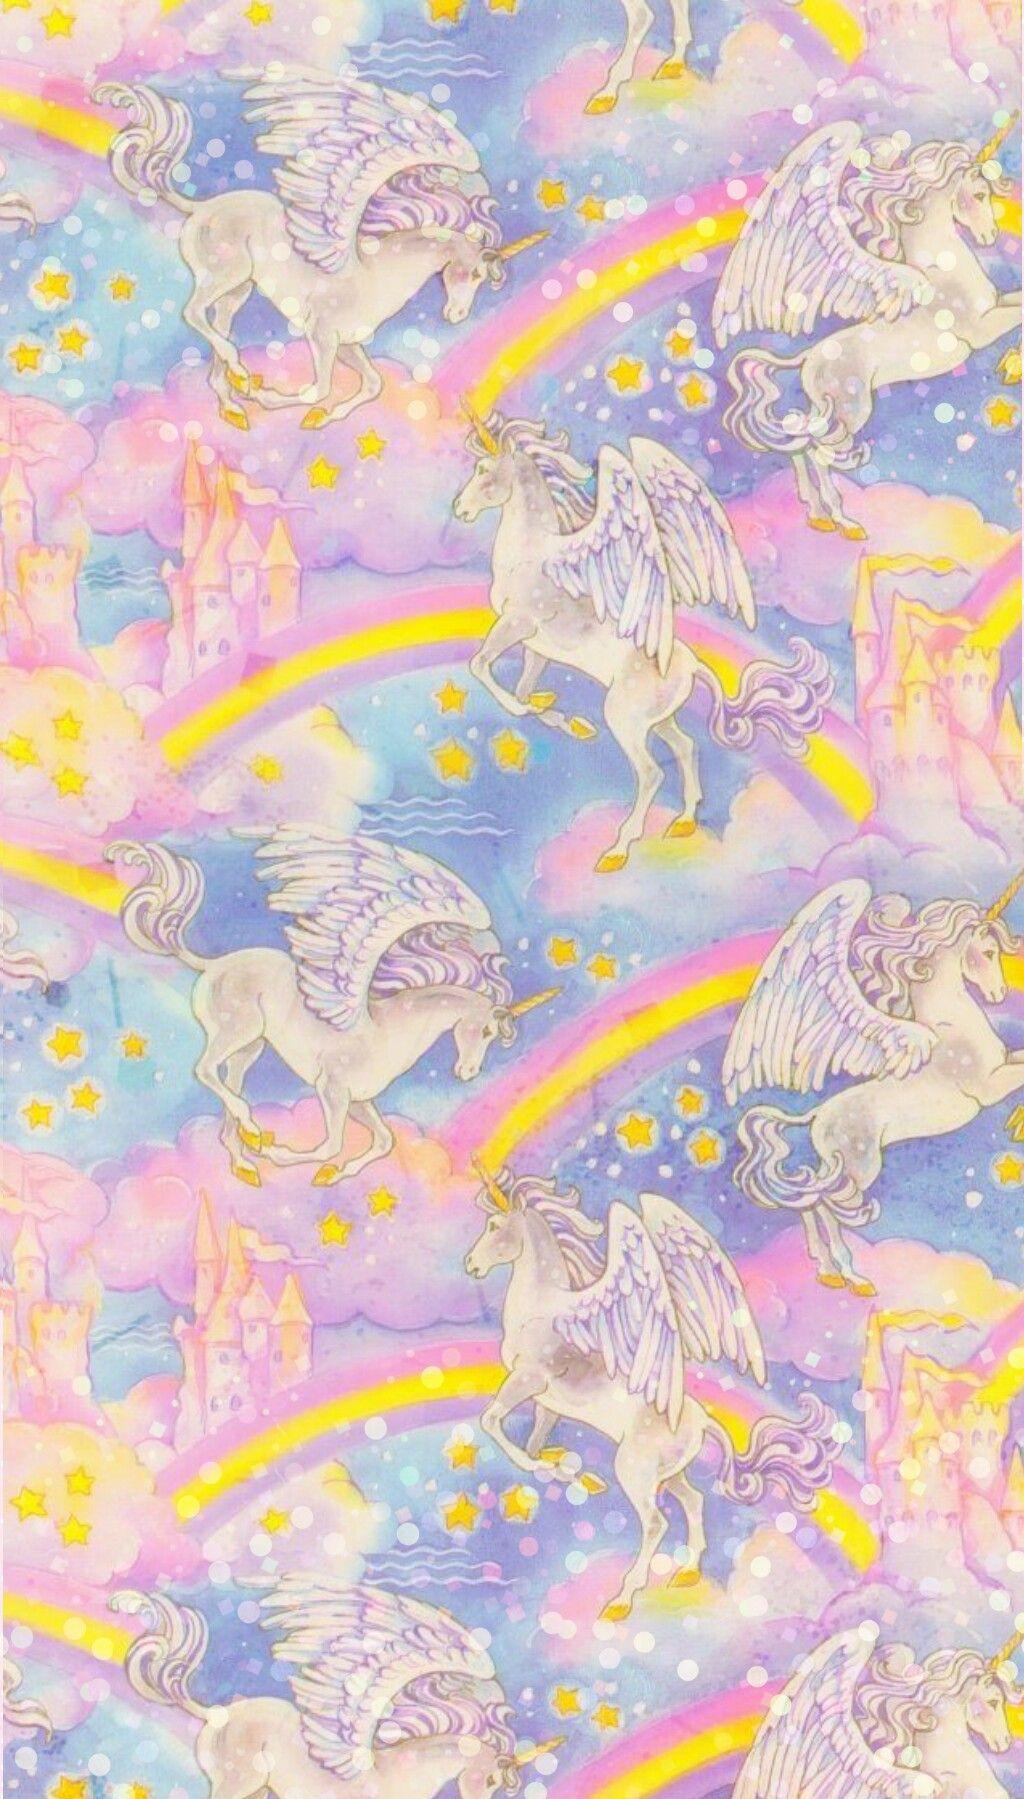 Glitter And Unicorns Wallpapers Top Free Glitter And Unicorns Backgrounds Wallpaperaccess Unicorn sparkly cute glitter sticker. glitter and unicorns wallpapers top